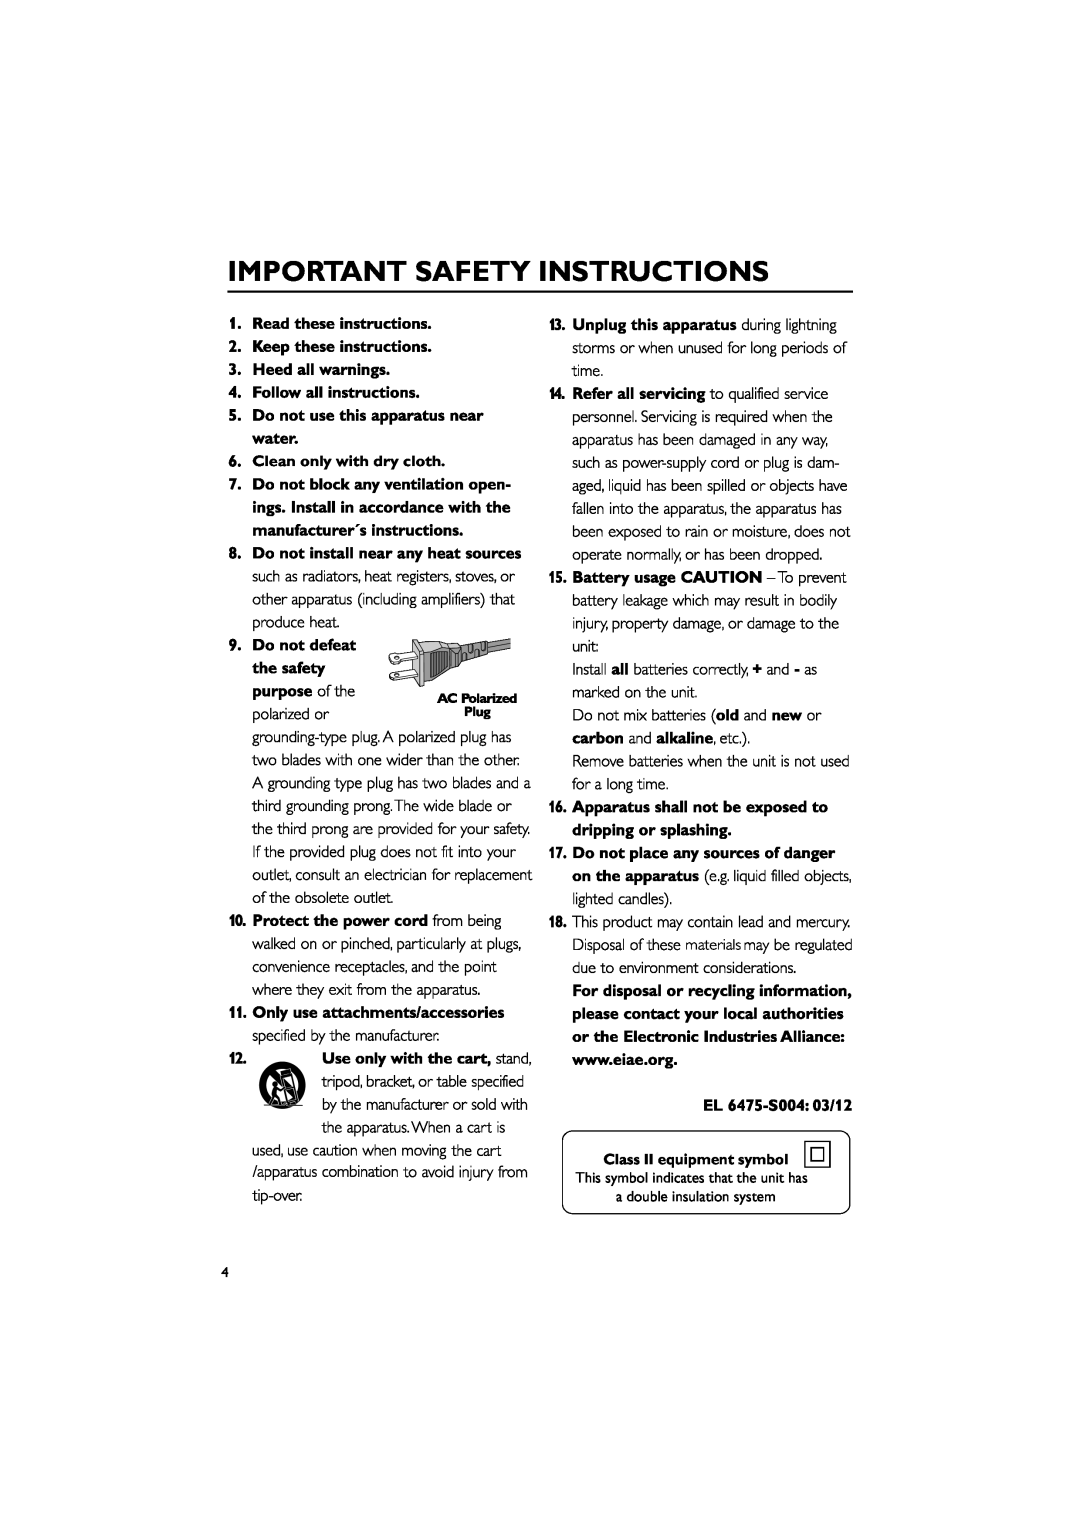 Philips MCD139B owner manual Important Safety Instructions, Clean only with dry cloth, Class II equipment symbol 